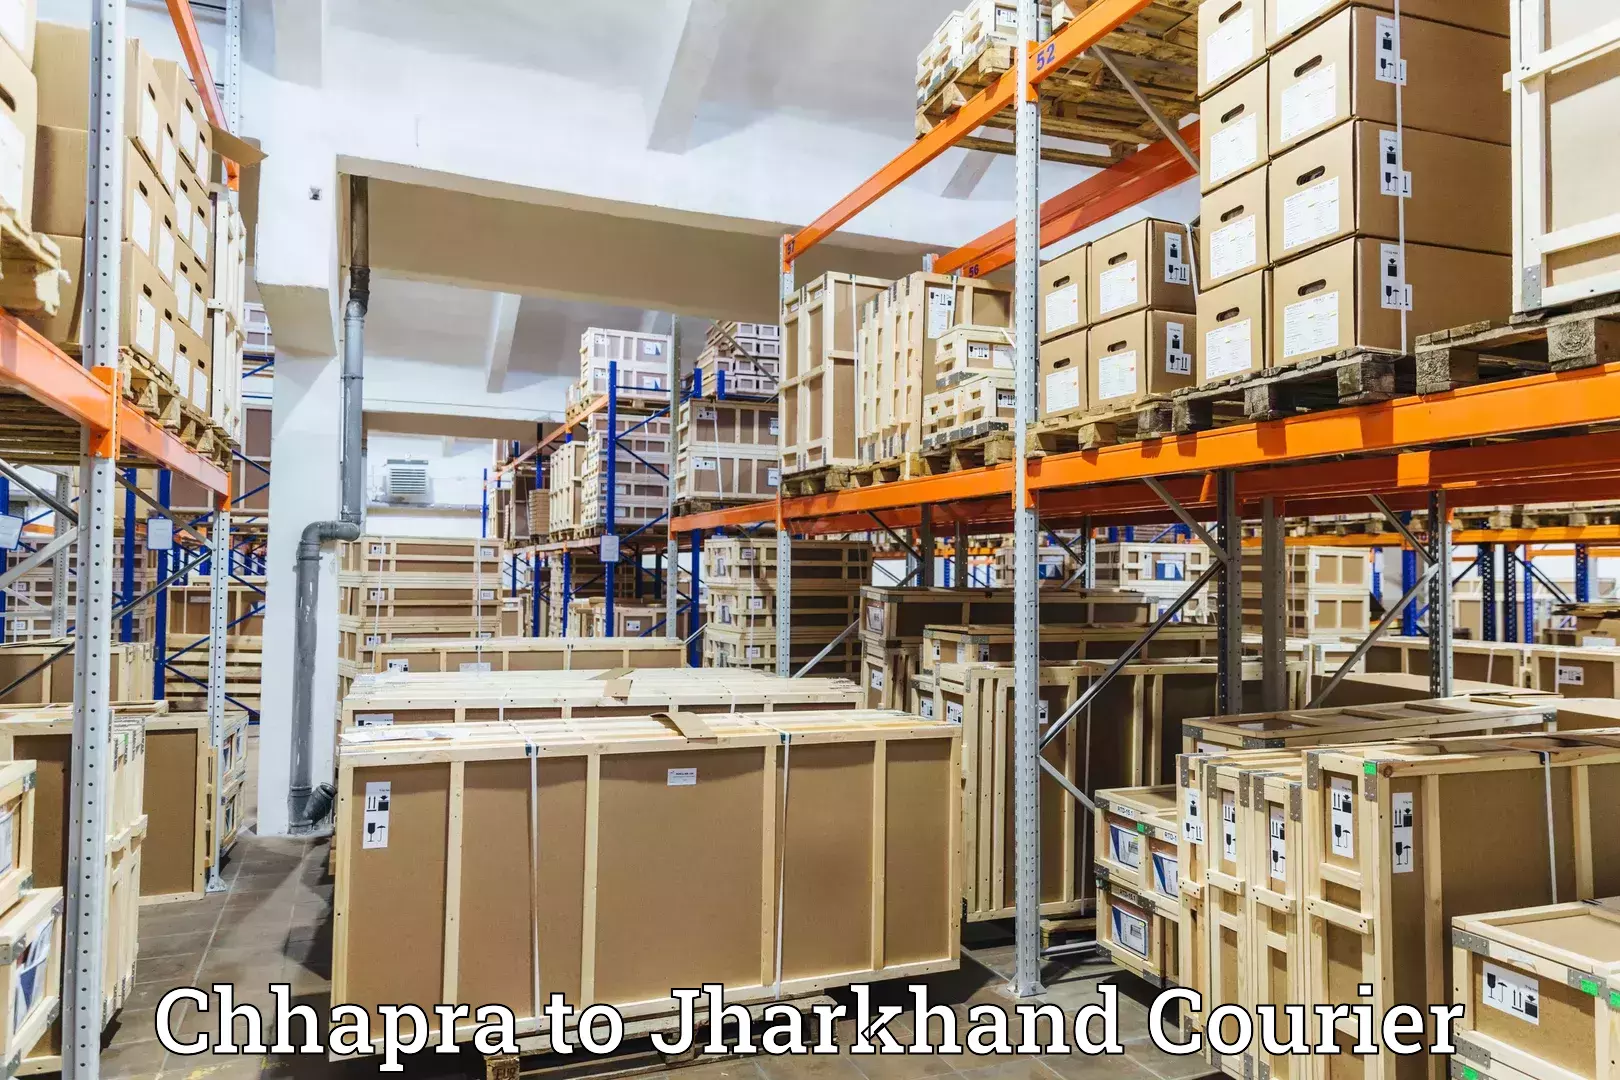 Next-day delivery options Chhapra to Dhanbad